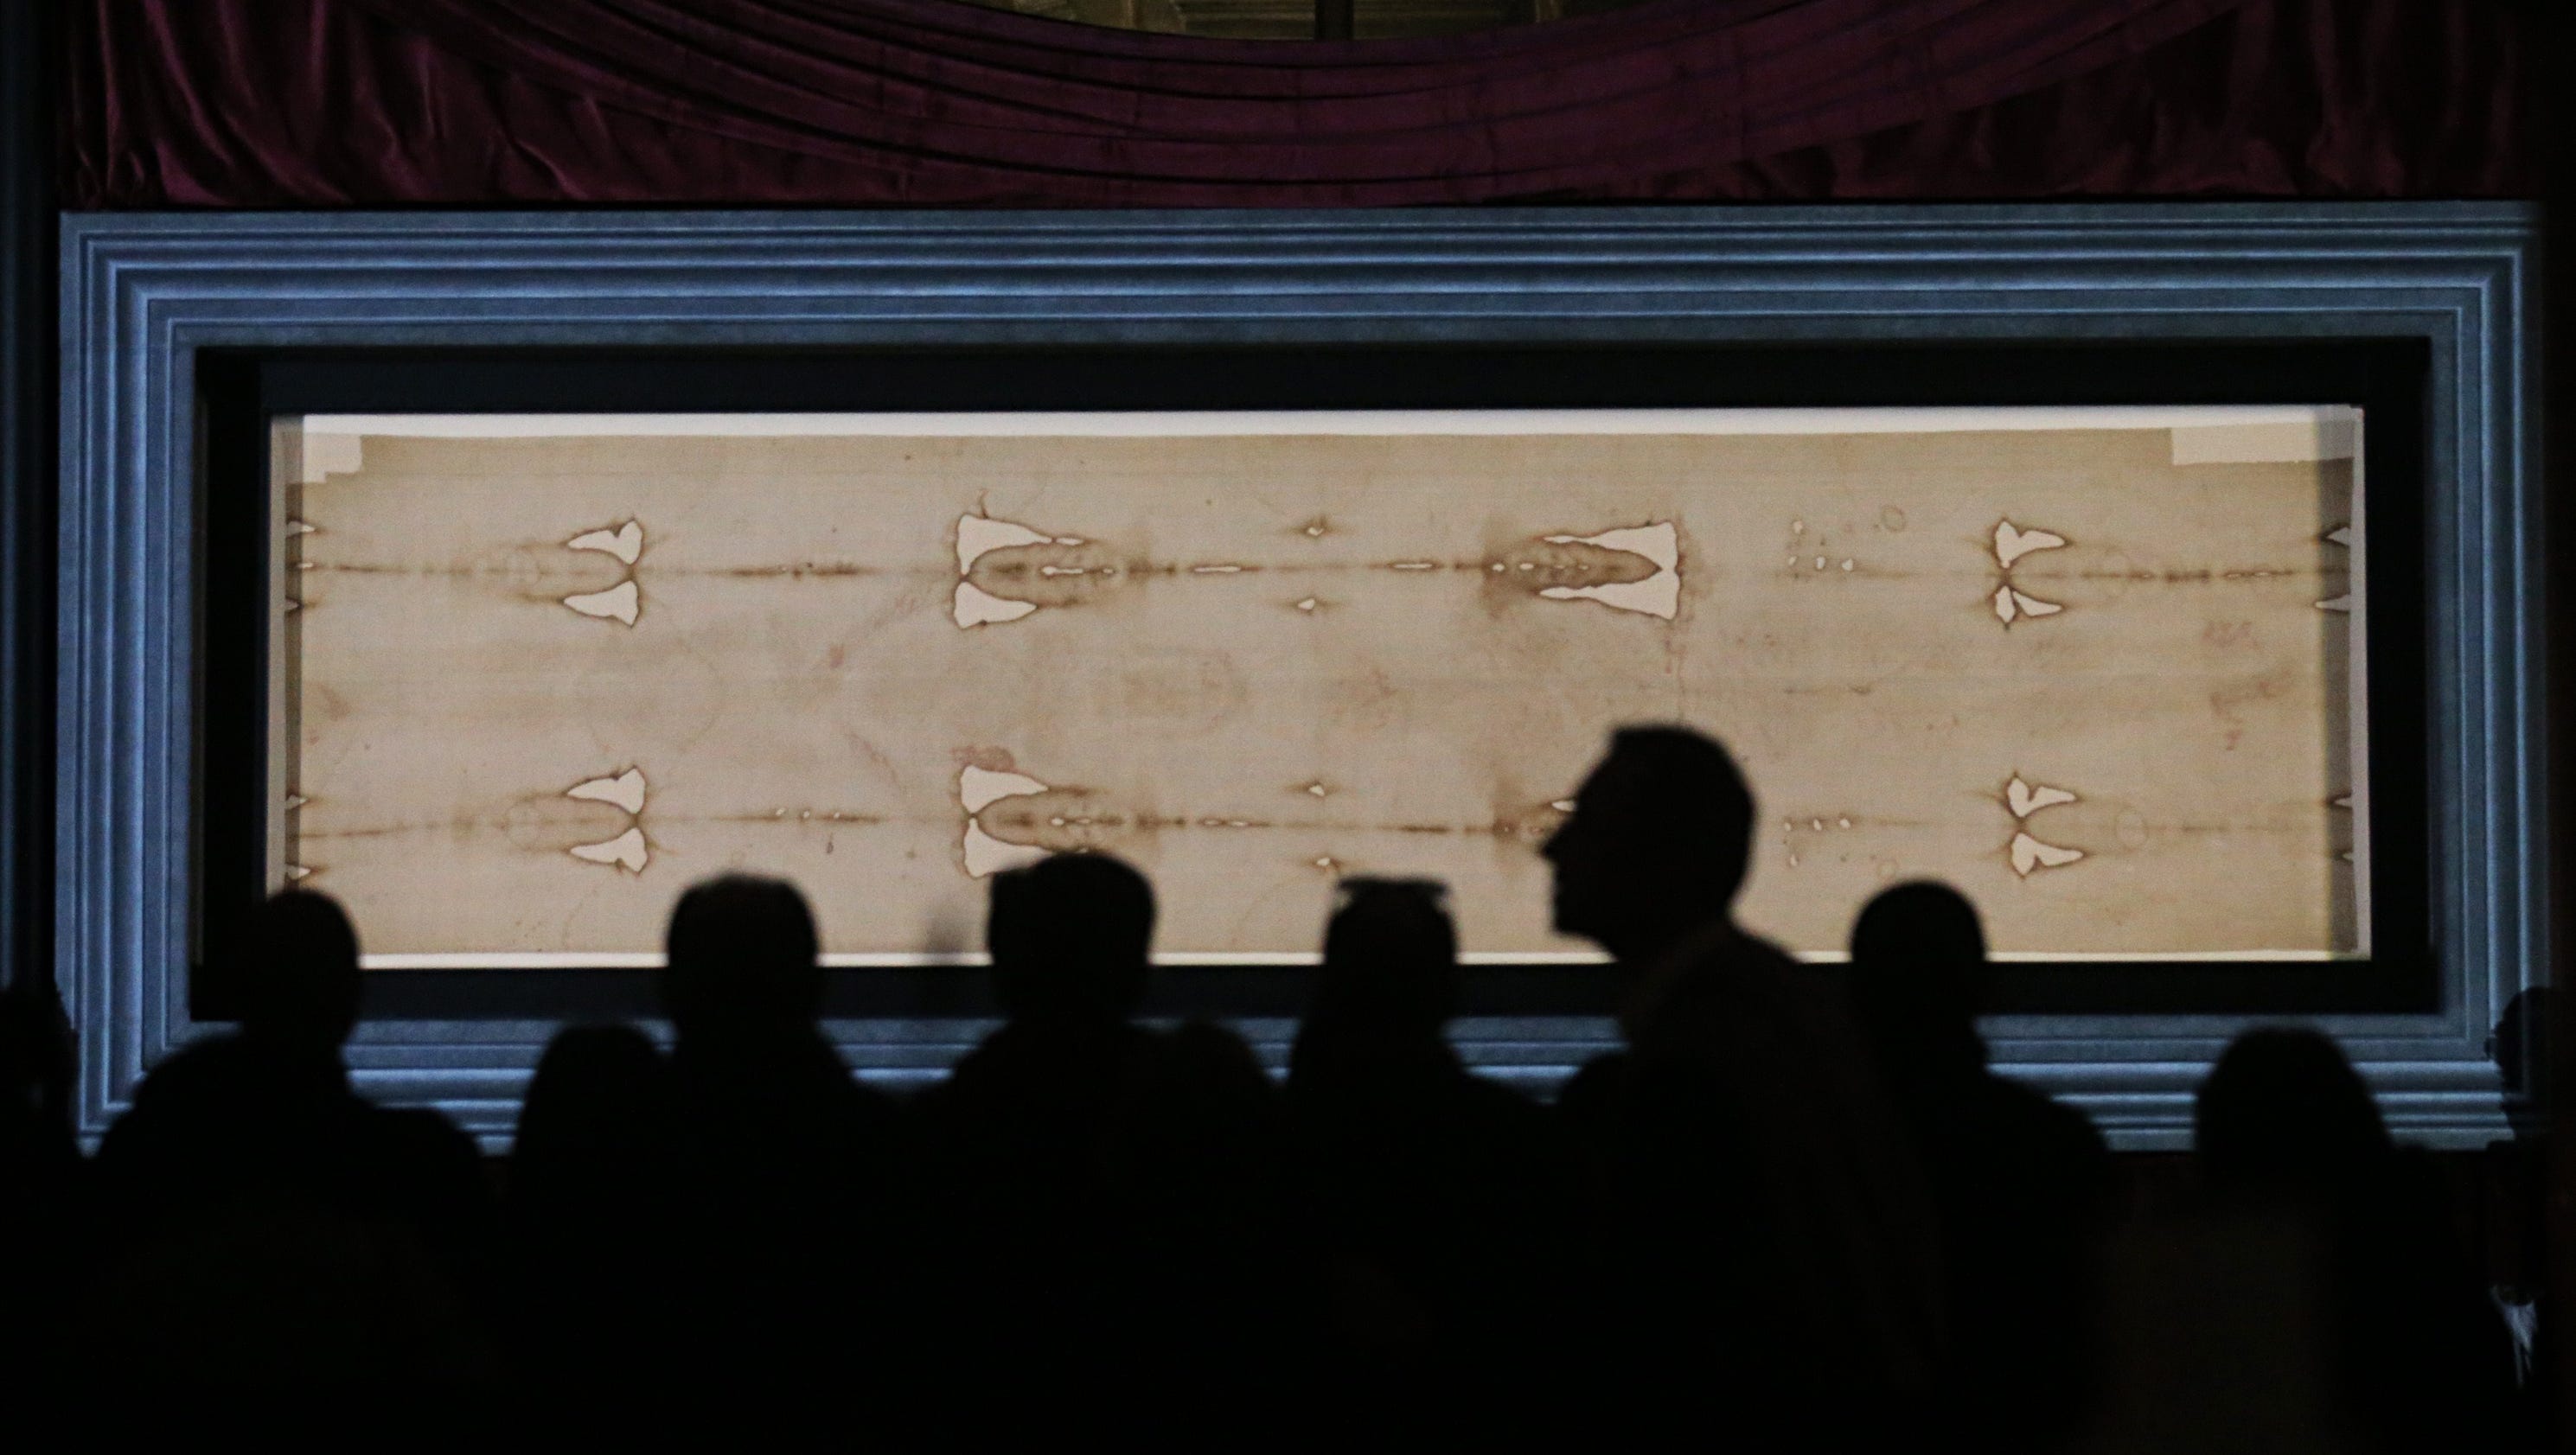 Shroud of Turin back on display in Italy3200 x 1680